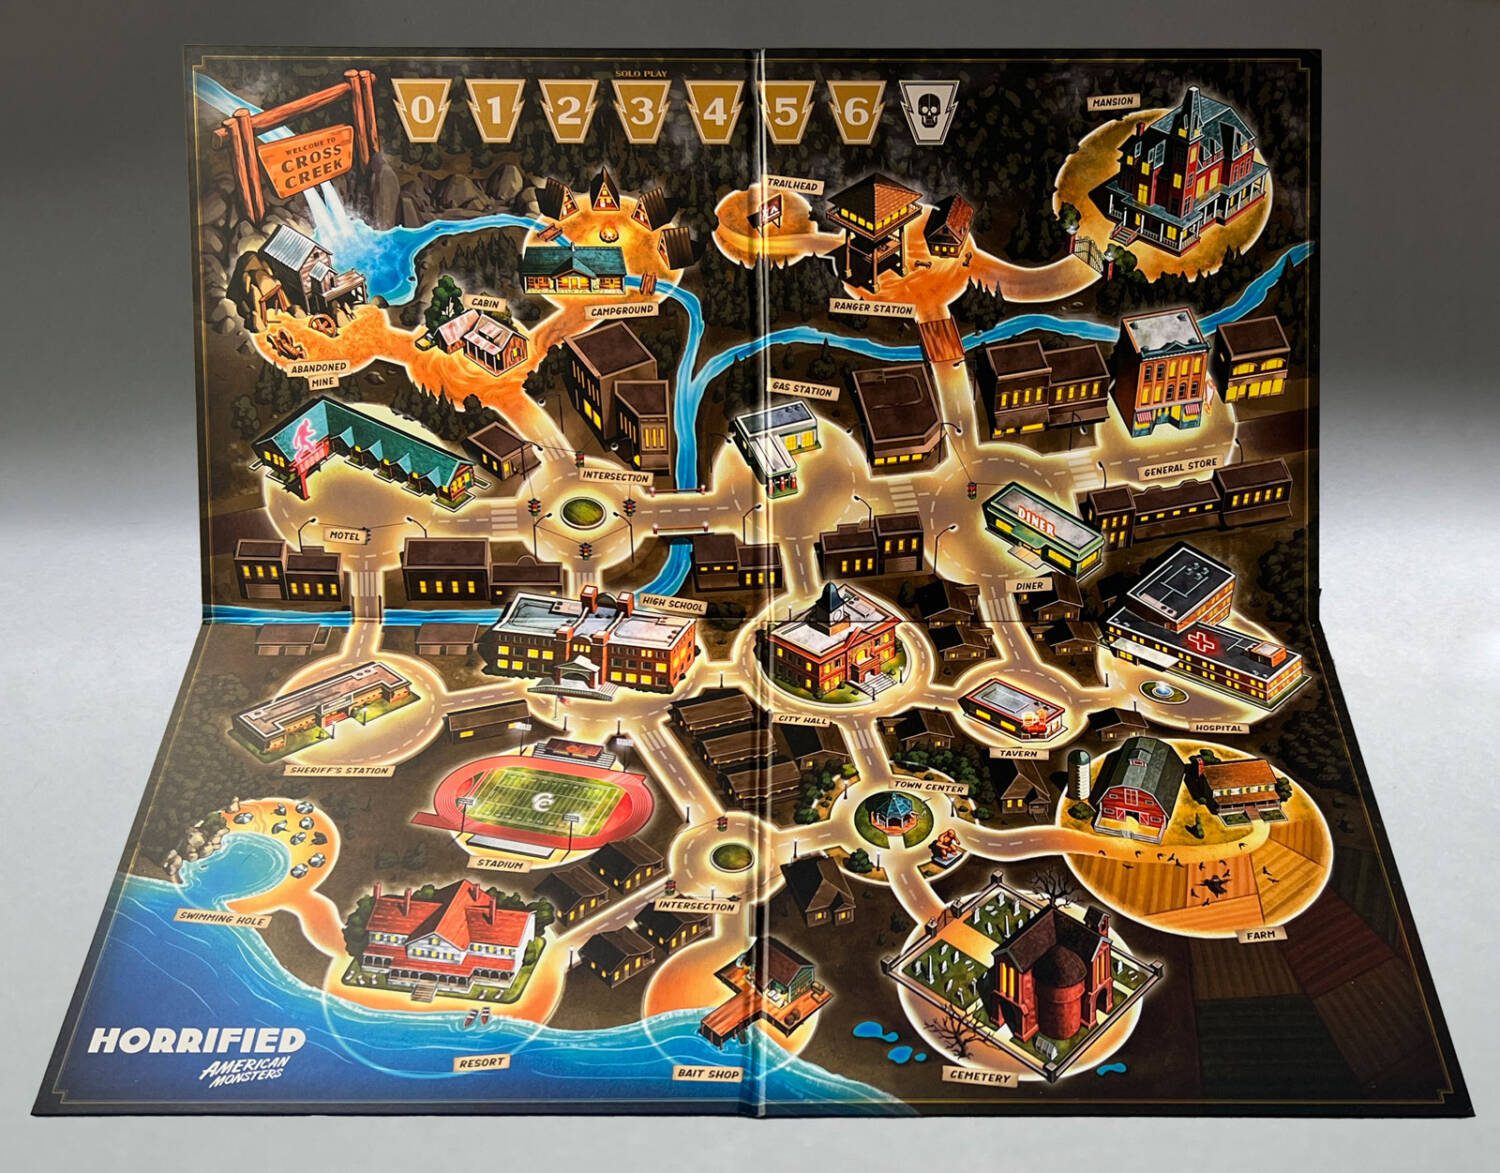 Horrified: American Monsters: the game board.